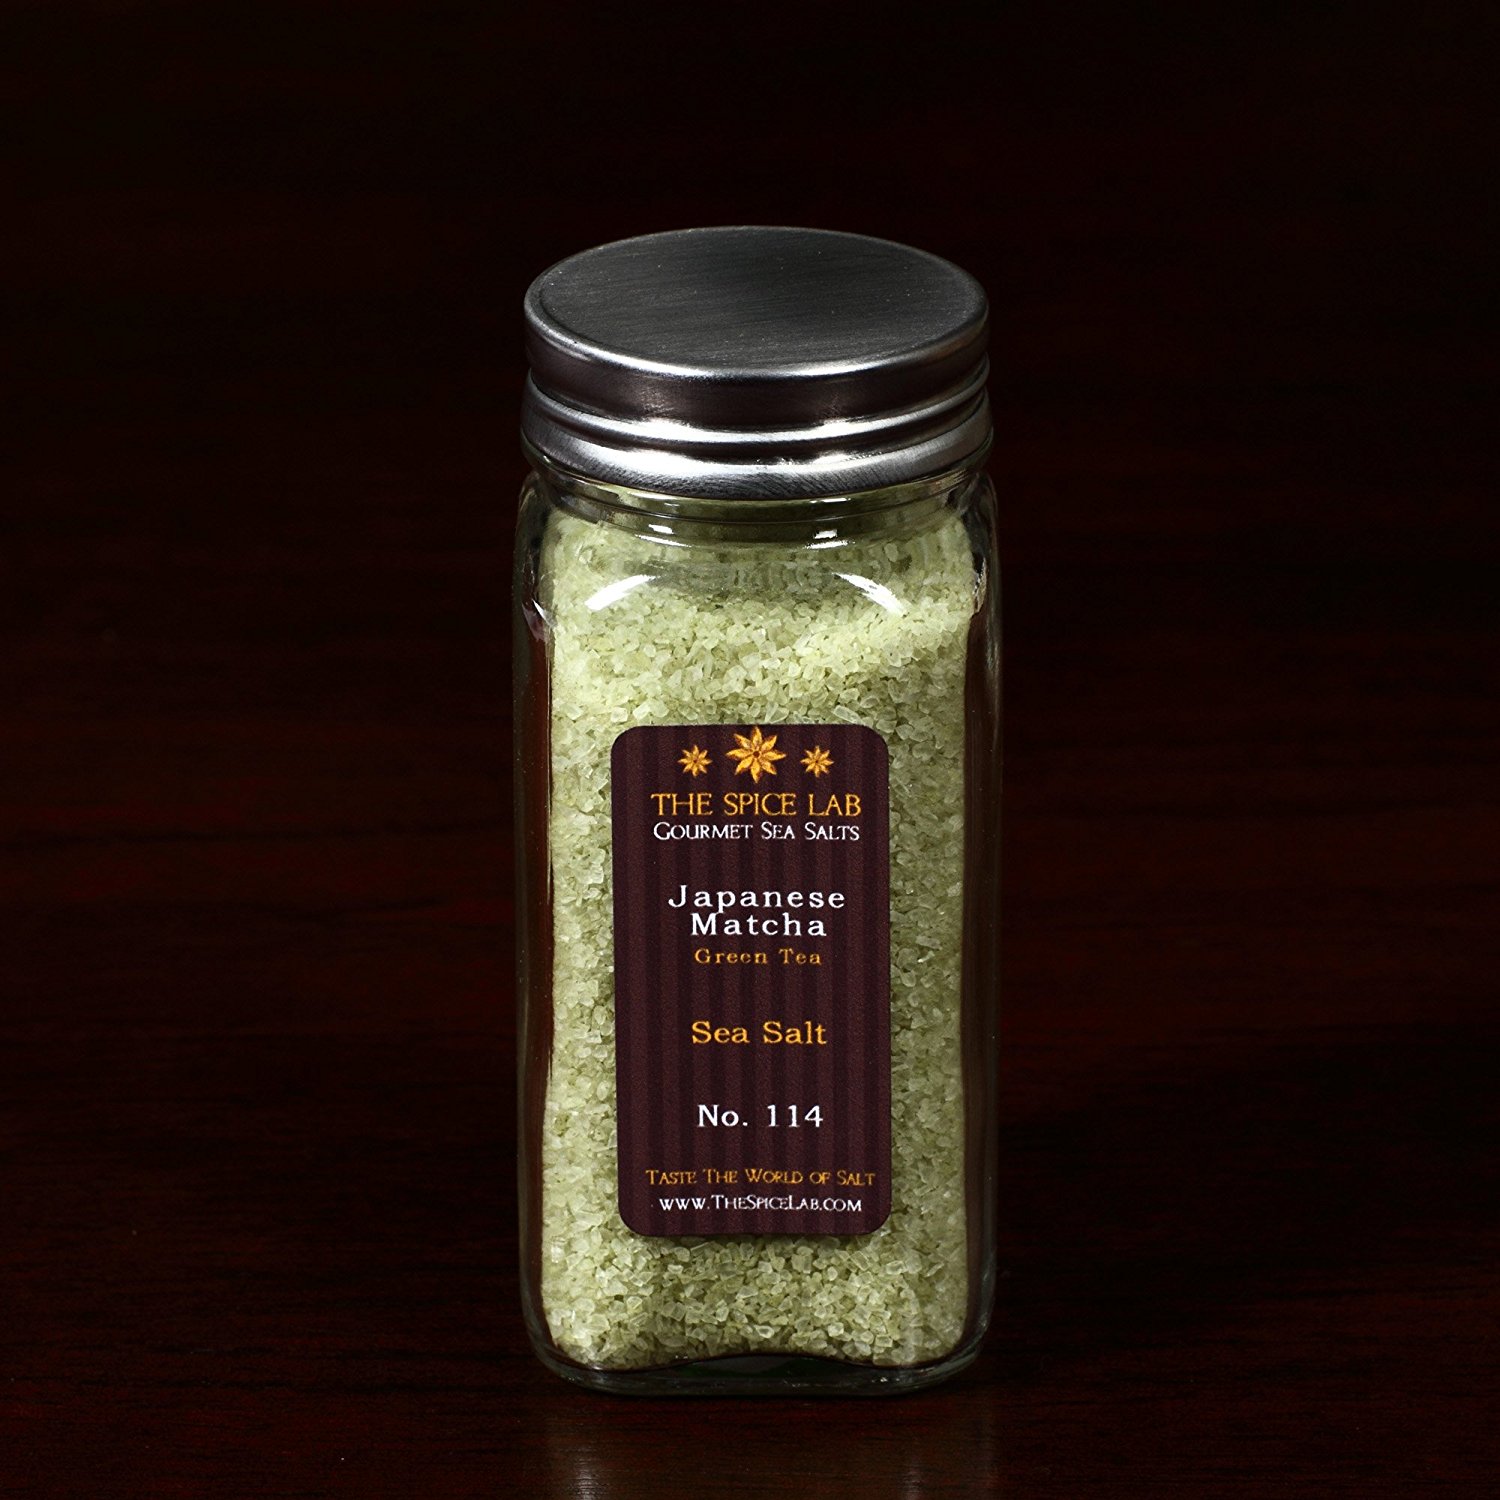 Glass Spice Bottle - Gourmet Japanese Matcha (Green Tea) Sea Salt - Packaged by TheSpiceLab Inc.